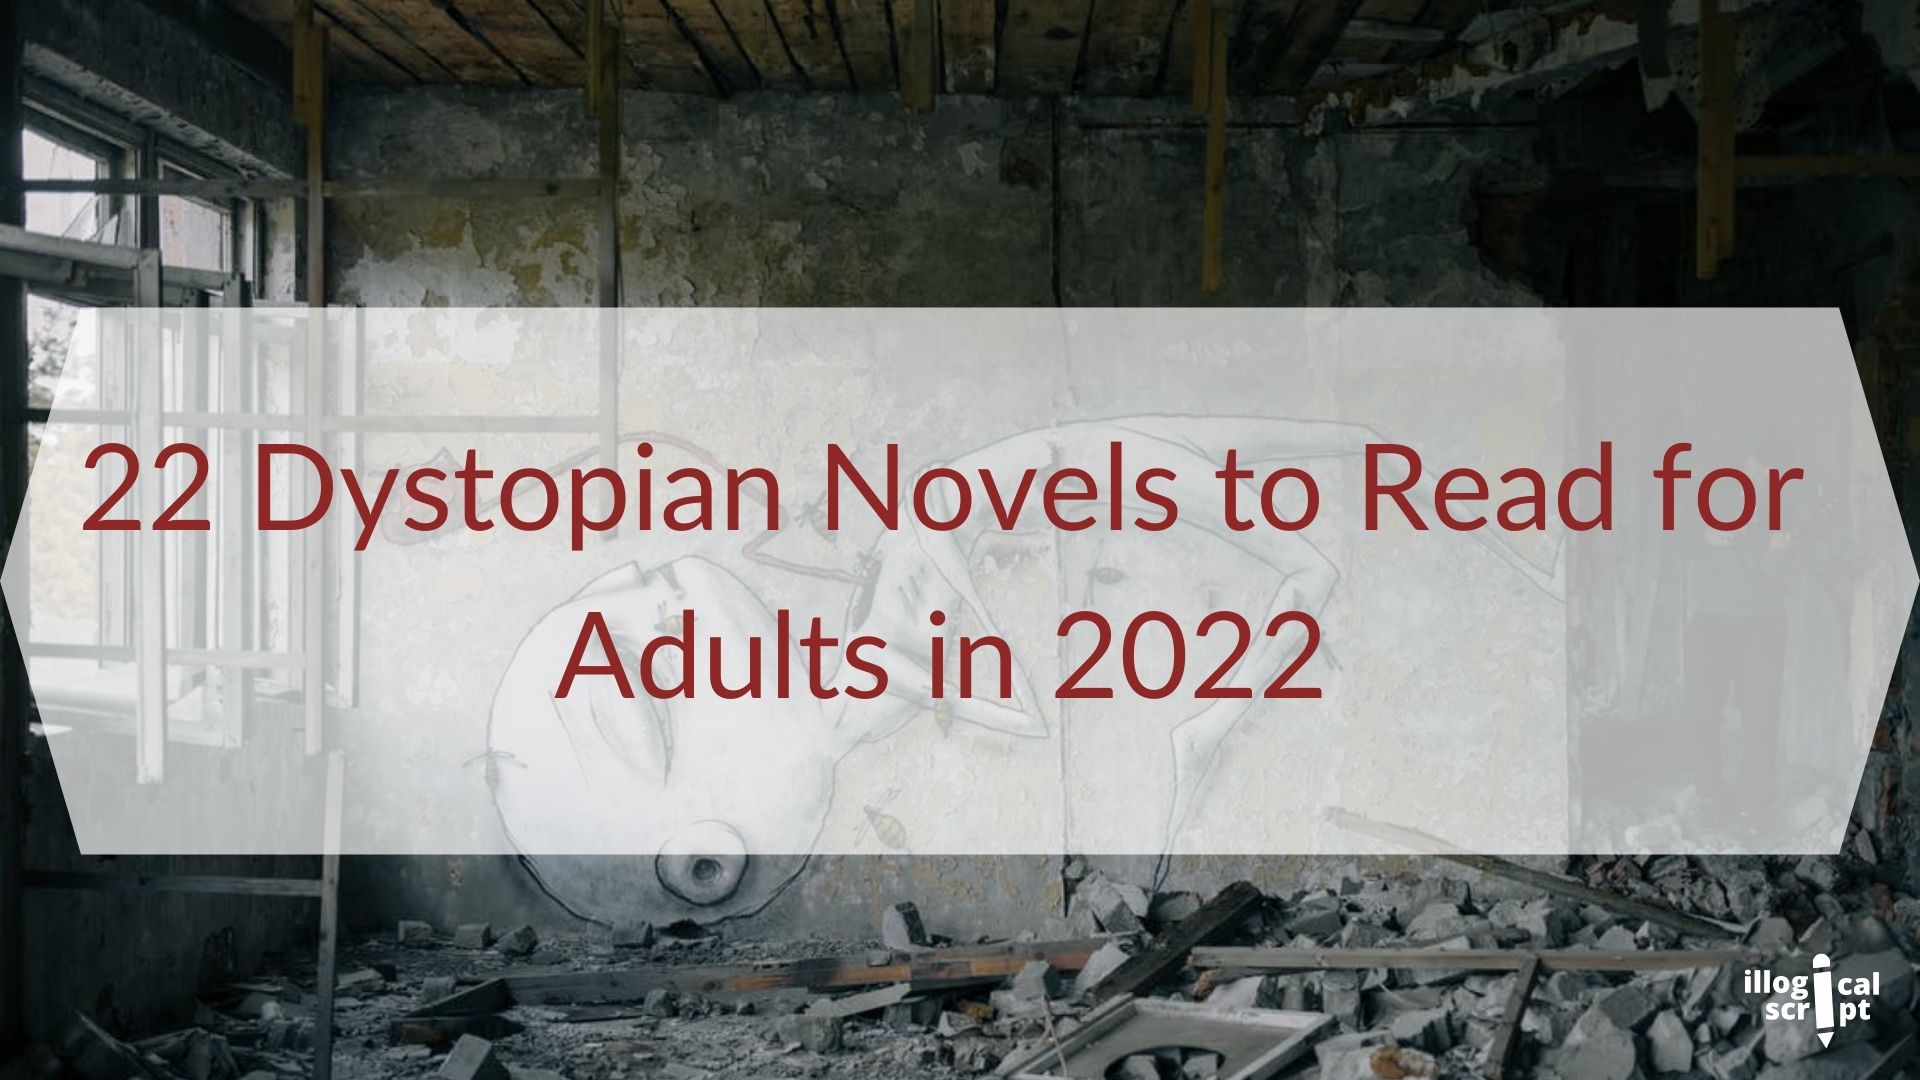 22 Dystopian Novels to Read for Adults in 2022